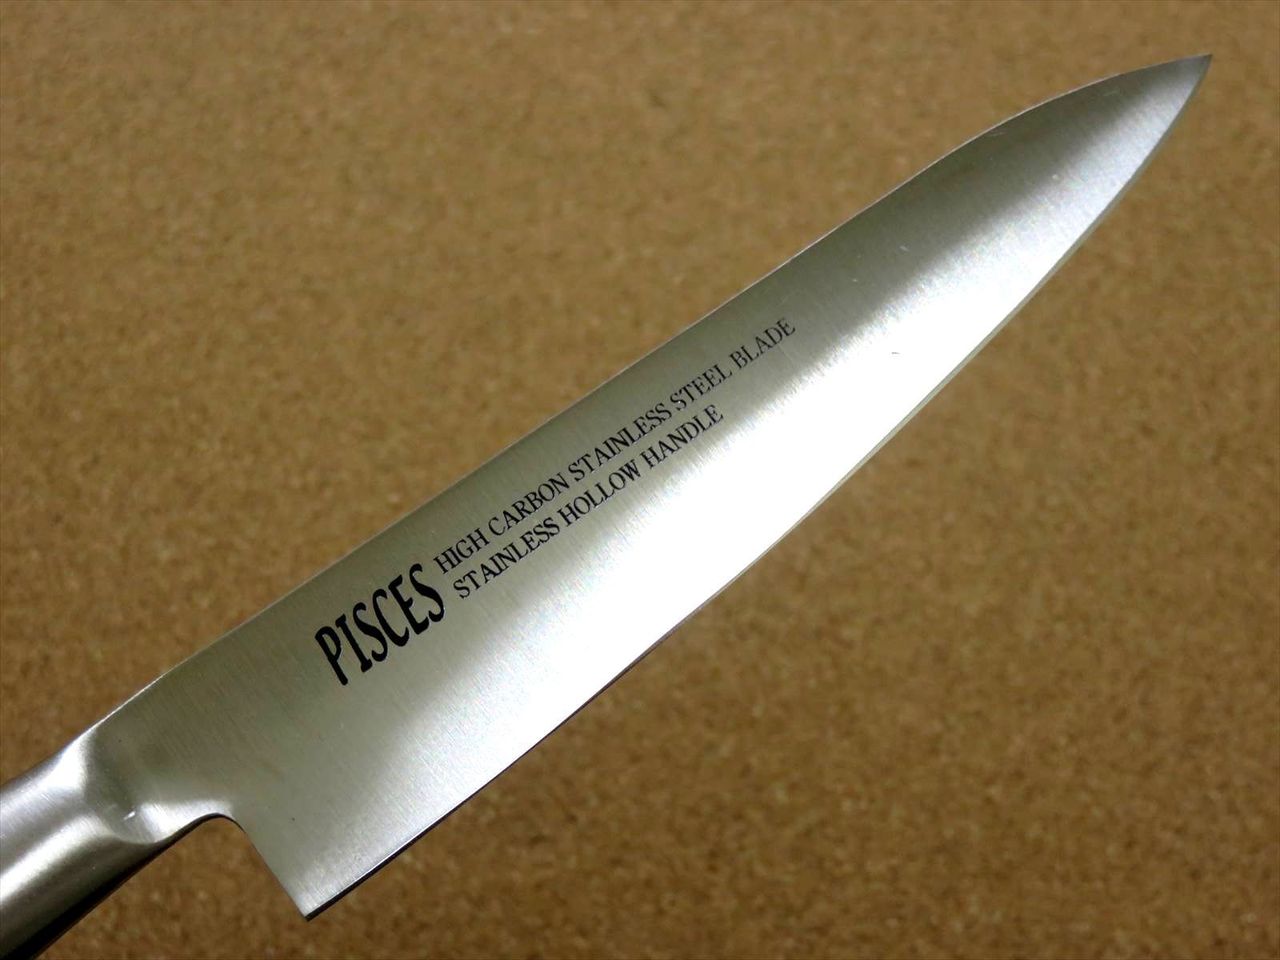 Japanese Pisces Kitchen Petty Utility Knife 5.5 inch Stainless Handle SEKI JAPAN